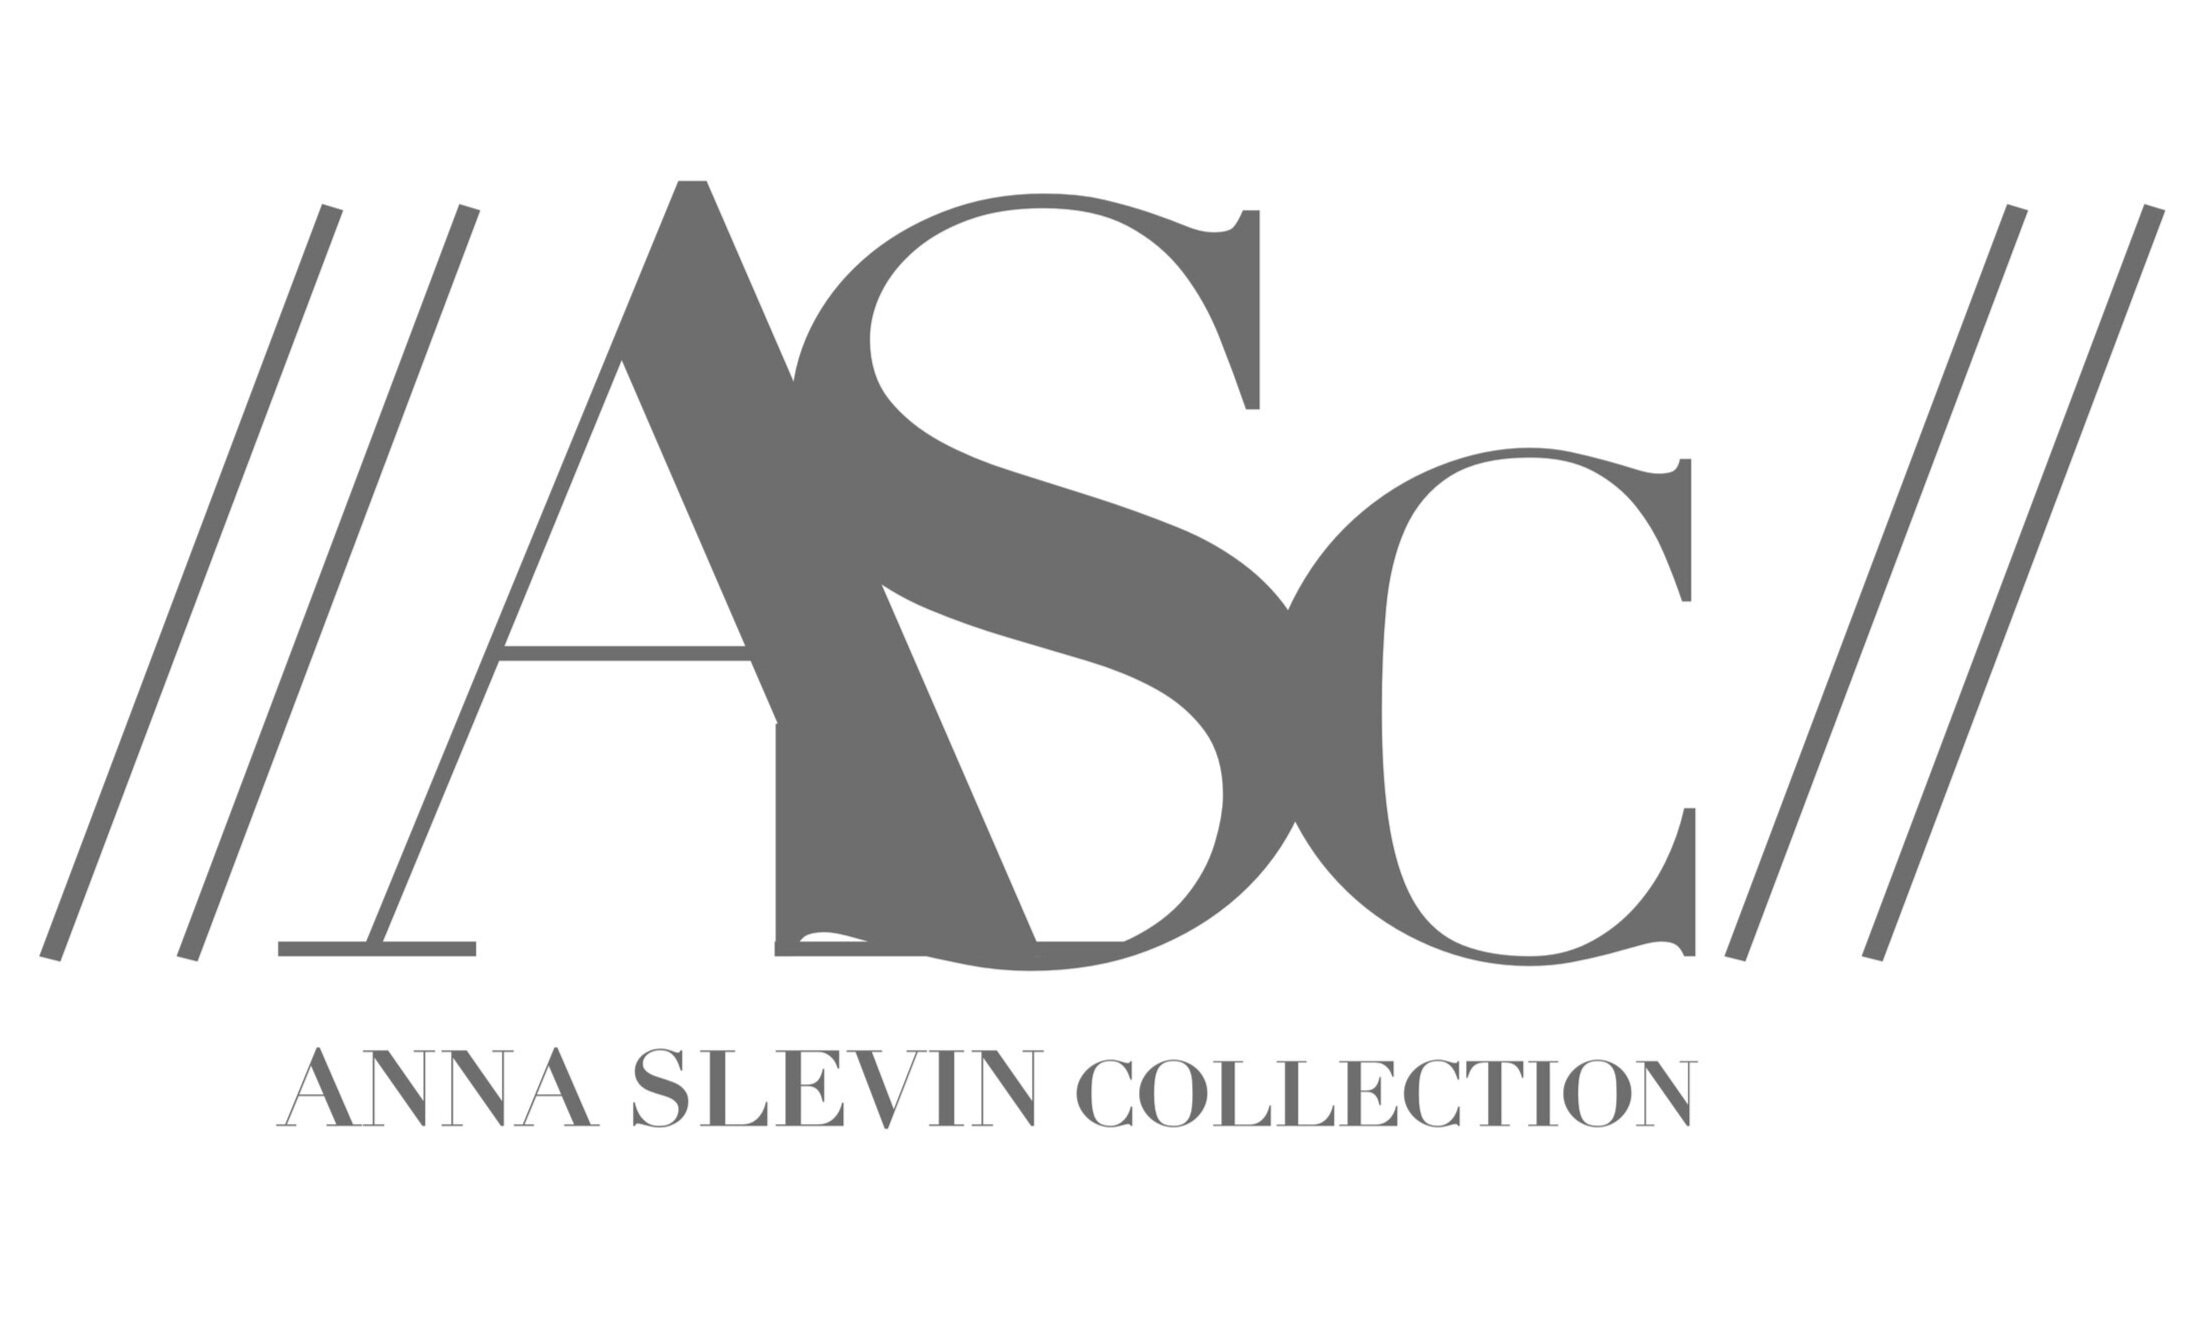 ANNA SLEVIN COLLECTION